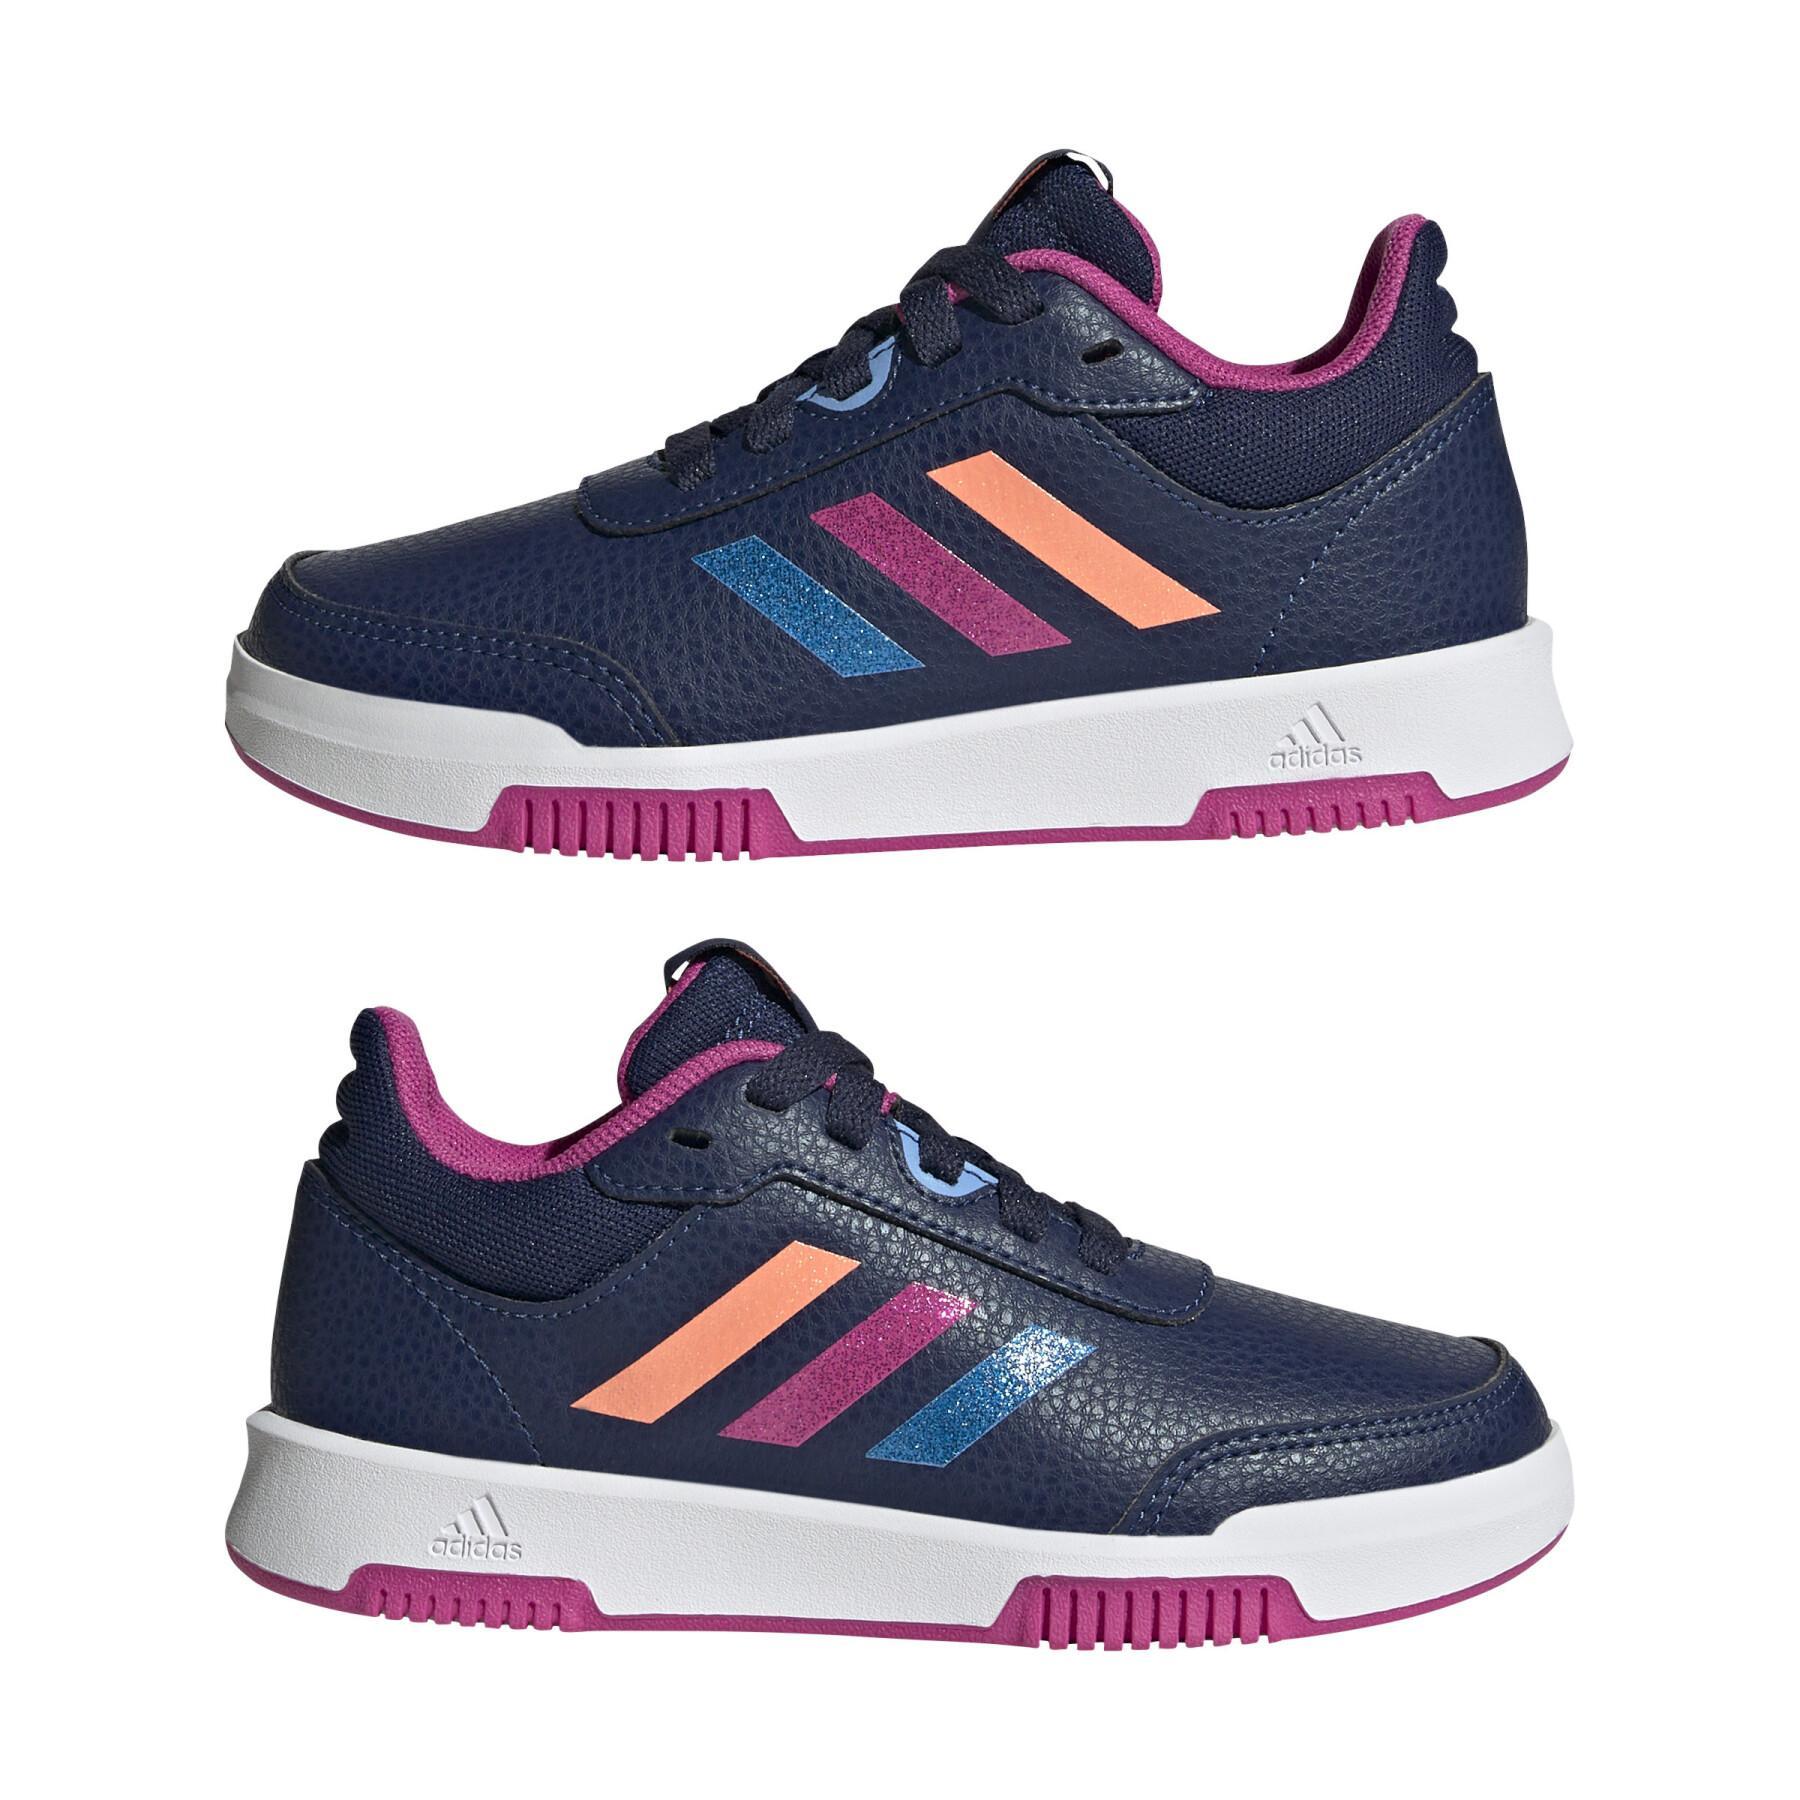 Children's lace-up sneakers adidas Tensaur